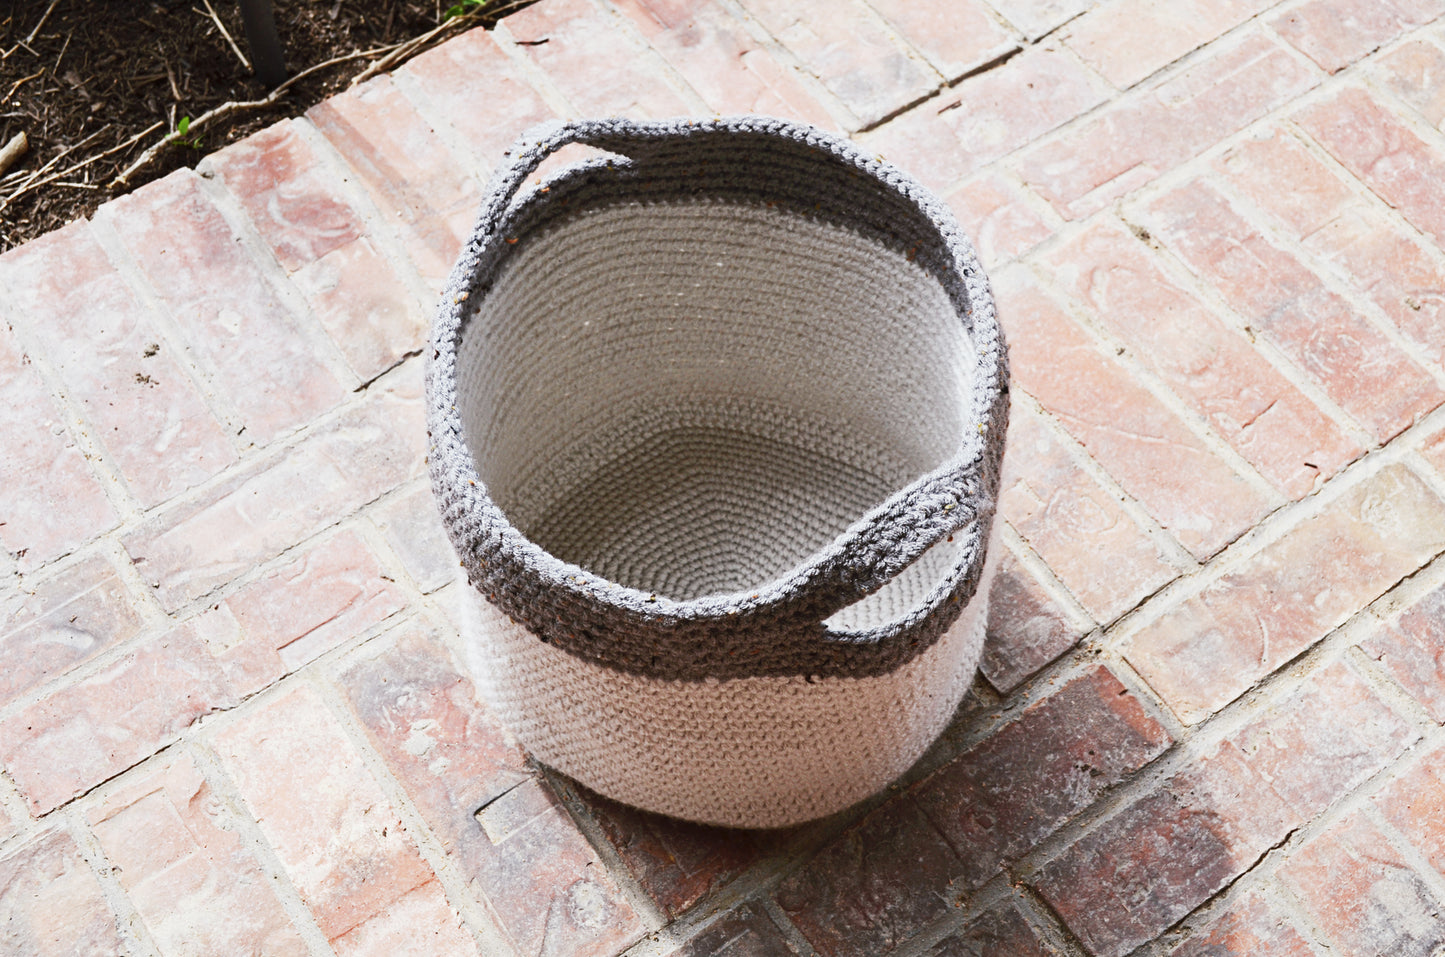 Woven Basket with Handles | Crochet Pattern